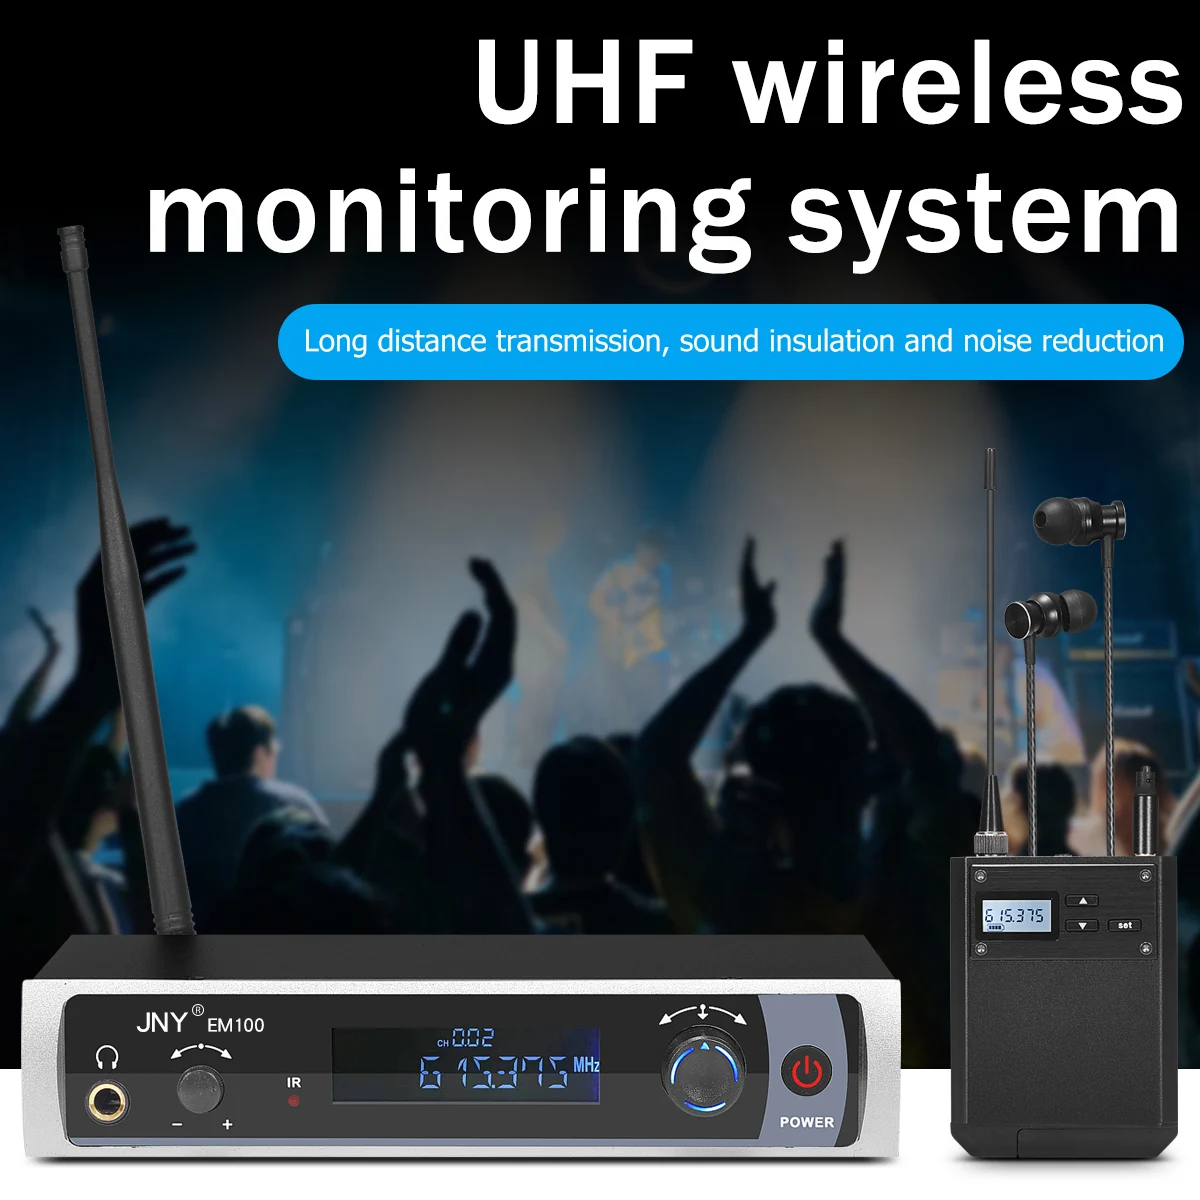 wireless monitoring system real time monitoring function infrared frequency matching uhf band phase locking